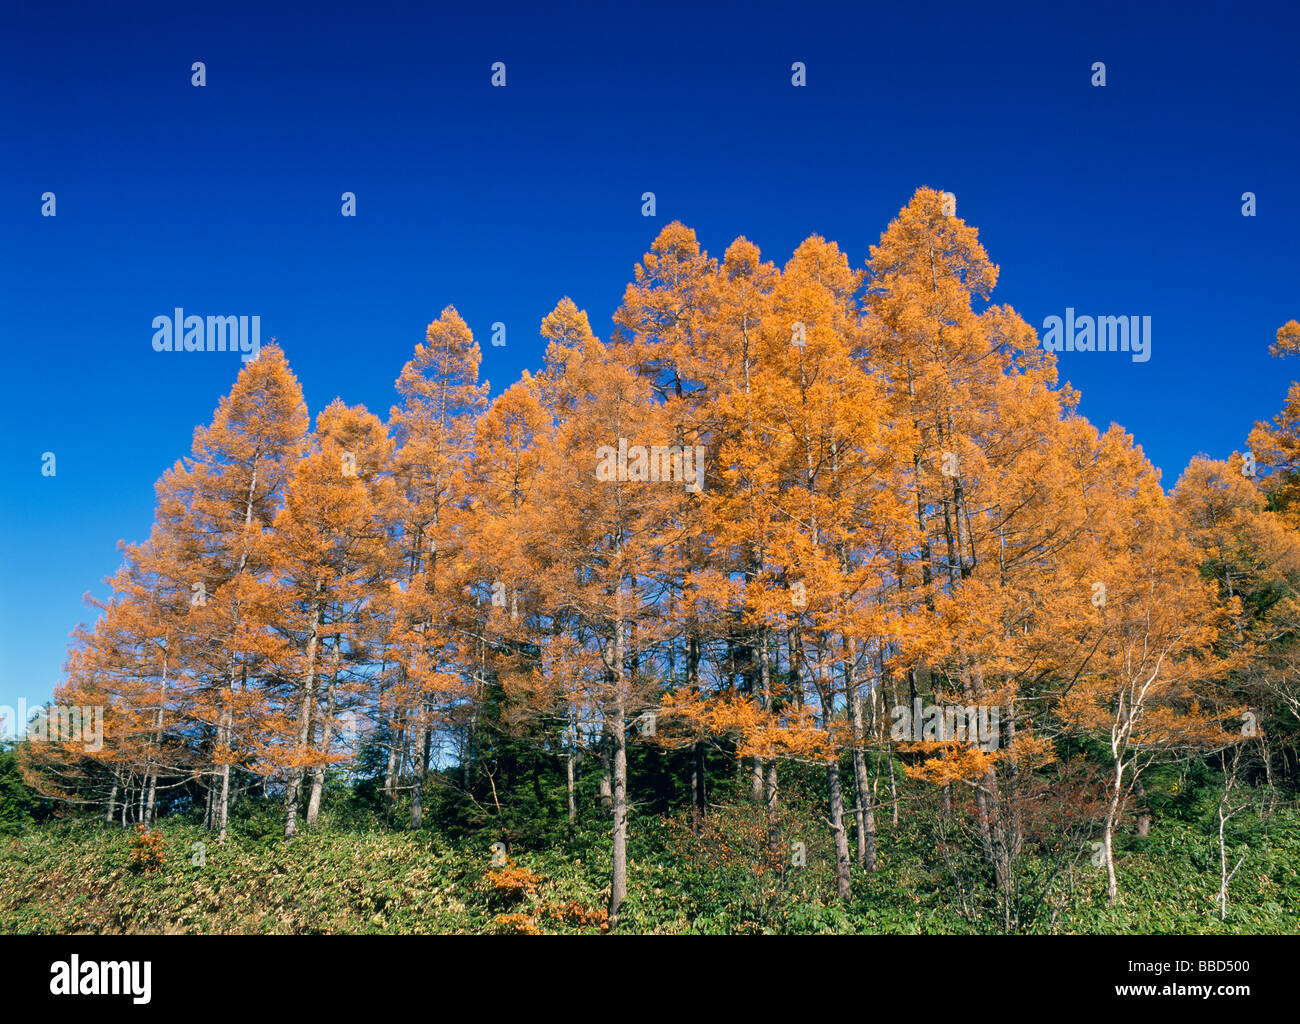 Tree With Autumn Leaves In Green Field Stock Photo